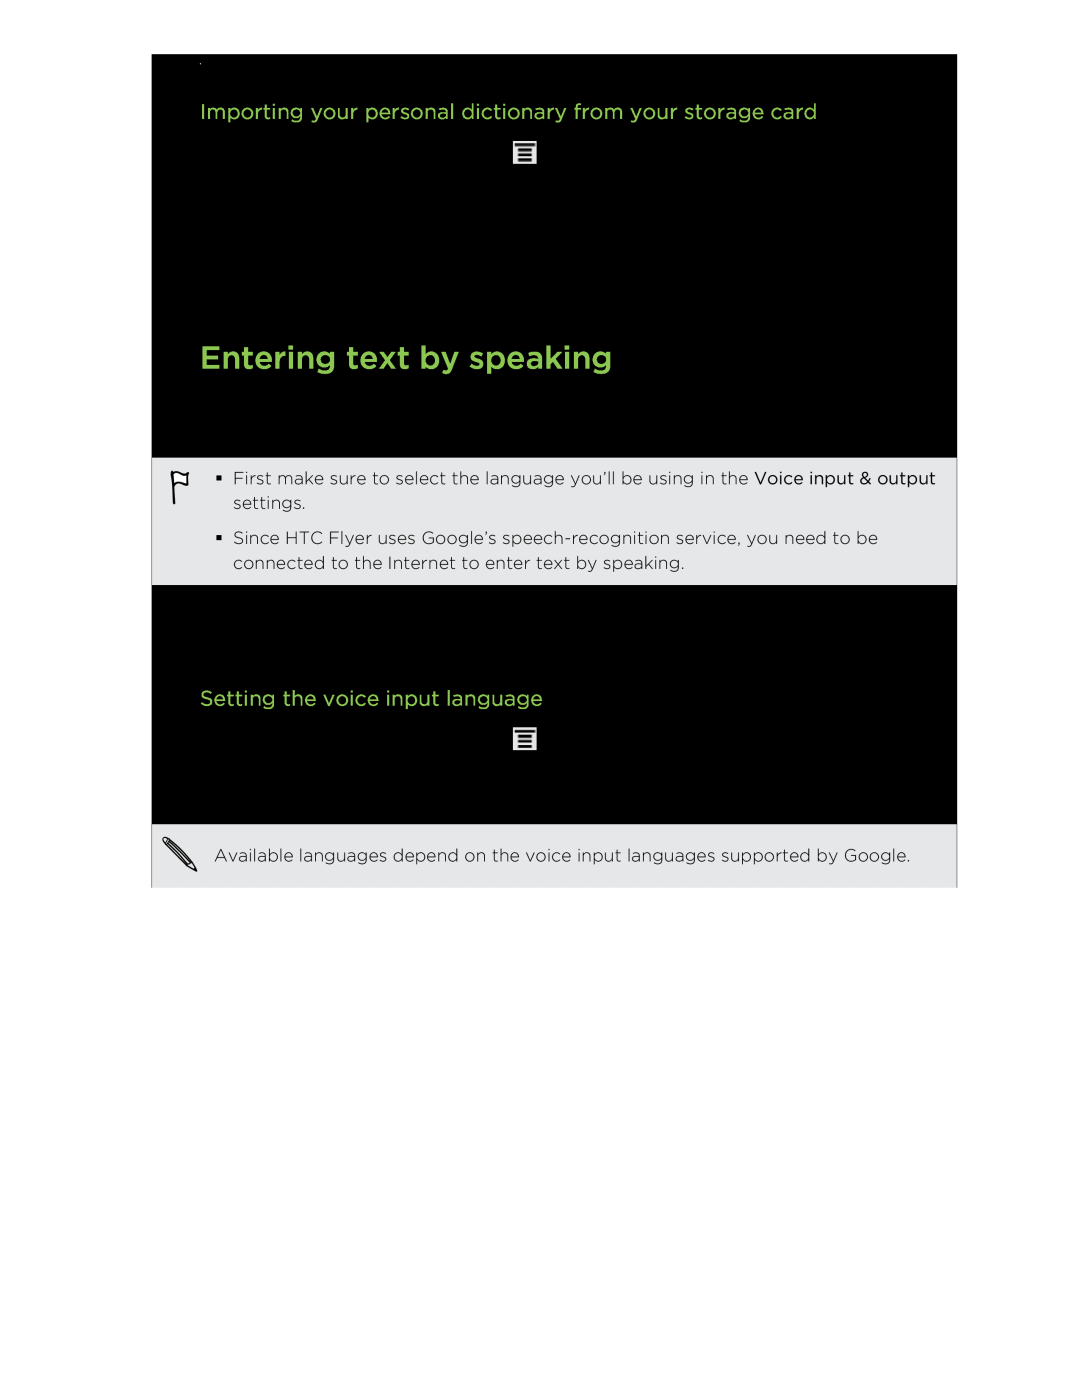 HTC HTCFlyerP512 manual Entering text by speaking, Importing your personal dictionary from your storage card 